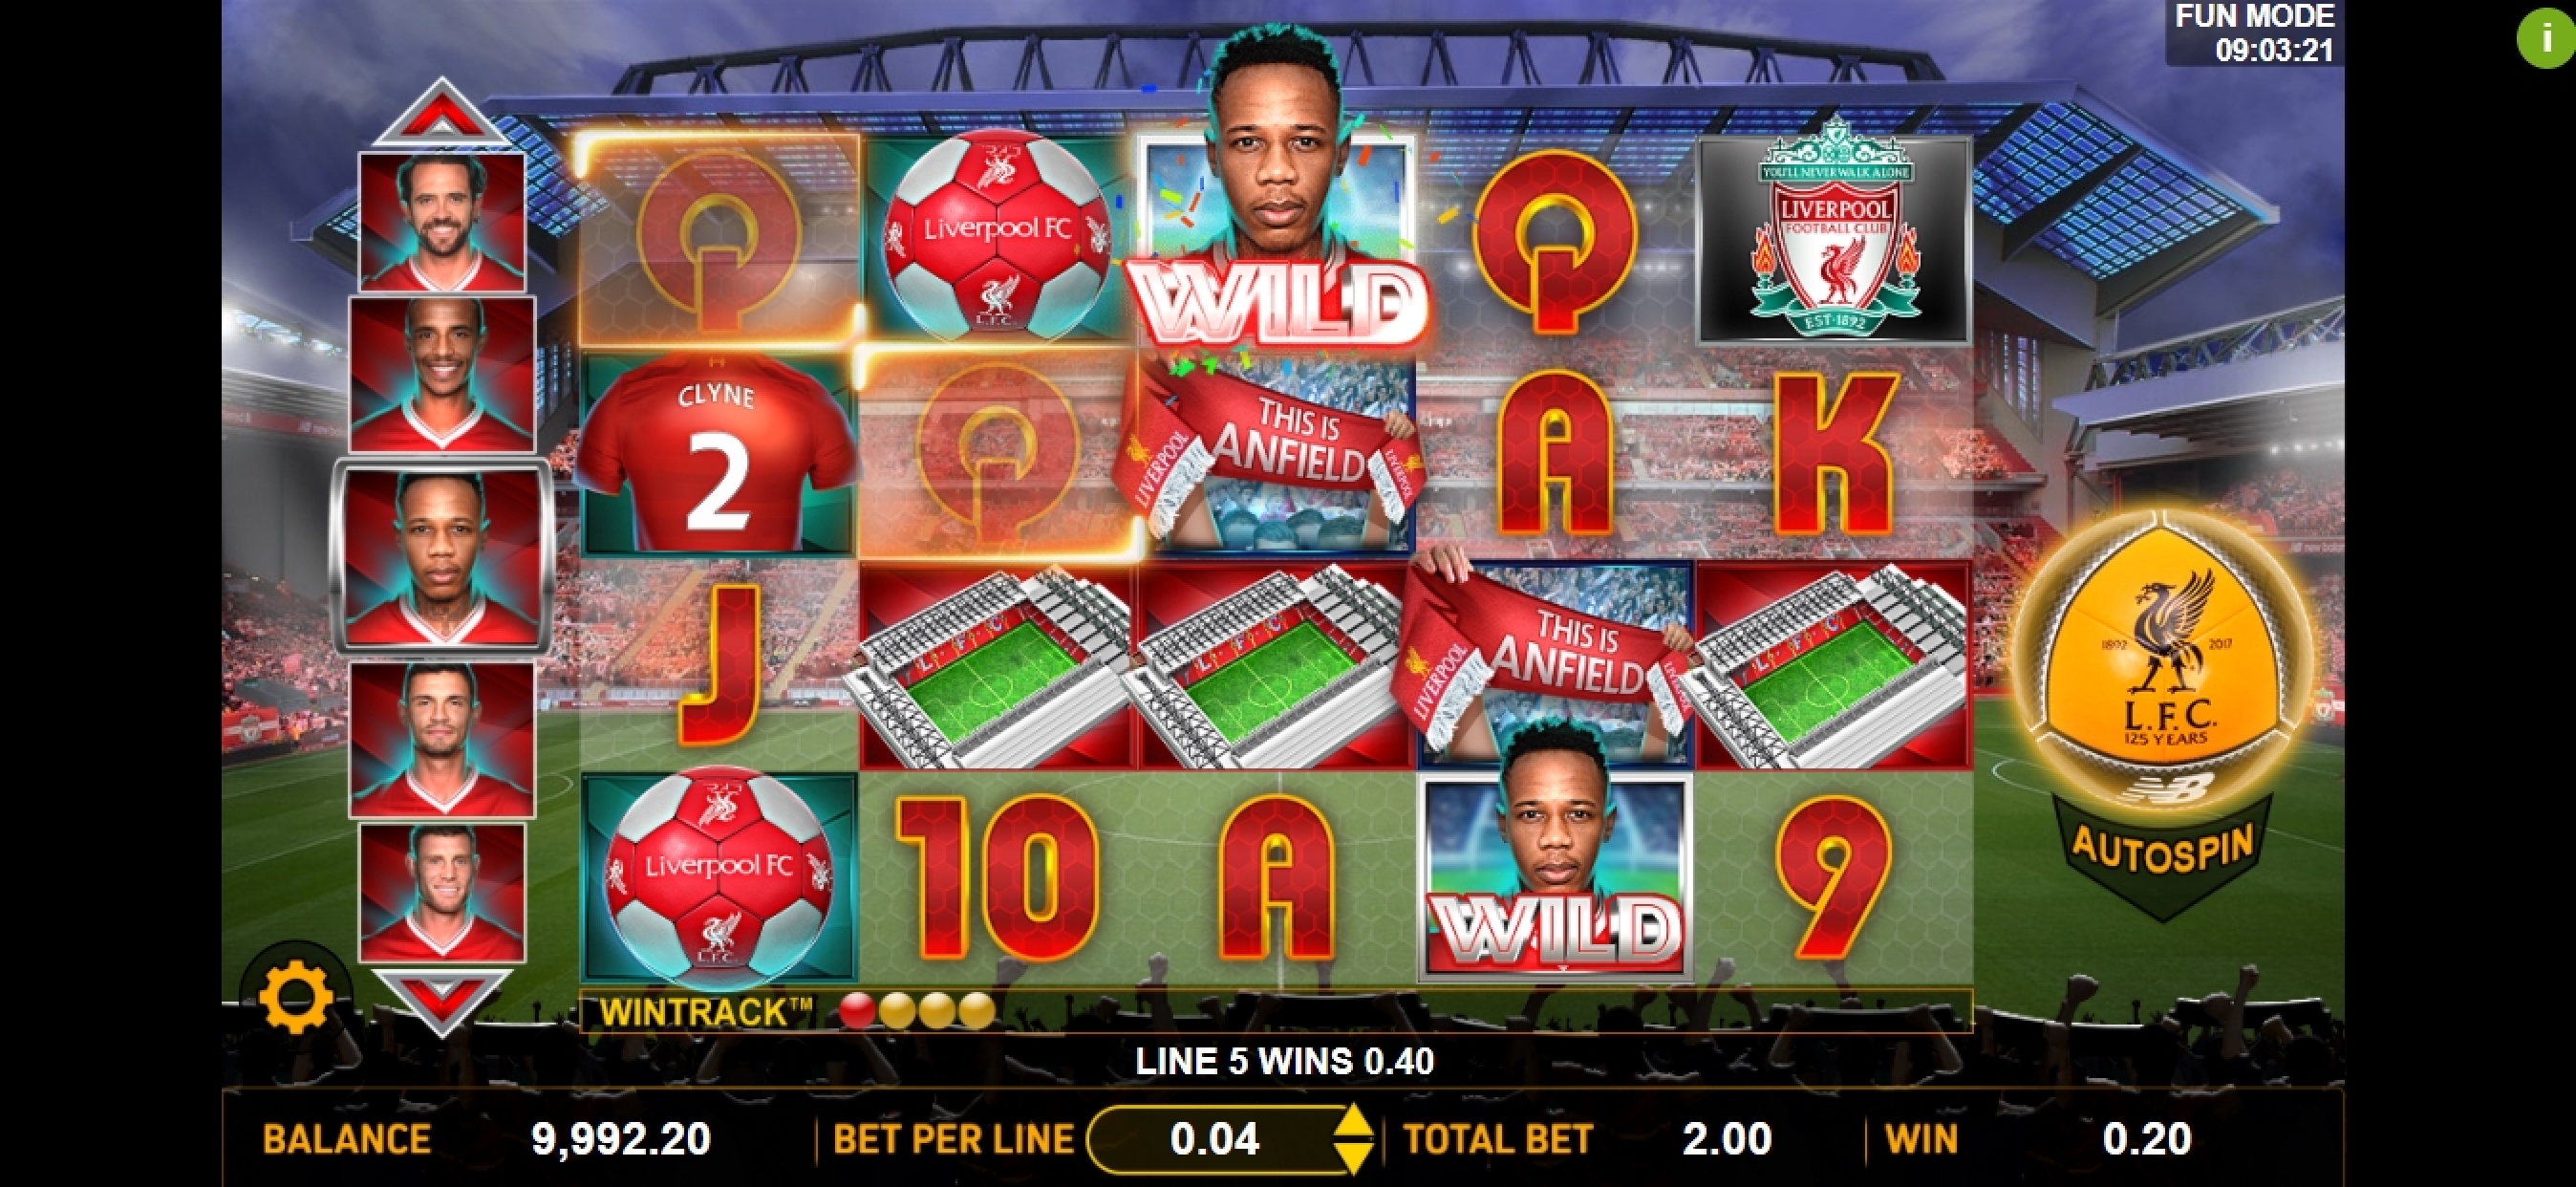 Win Money in Liverpool Football Club Slots Free Slot Game by Aspect Gaming